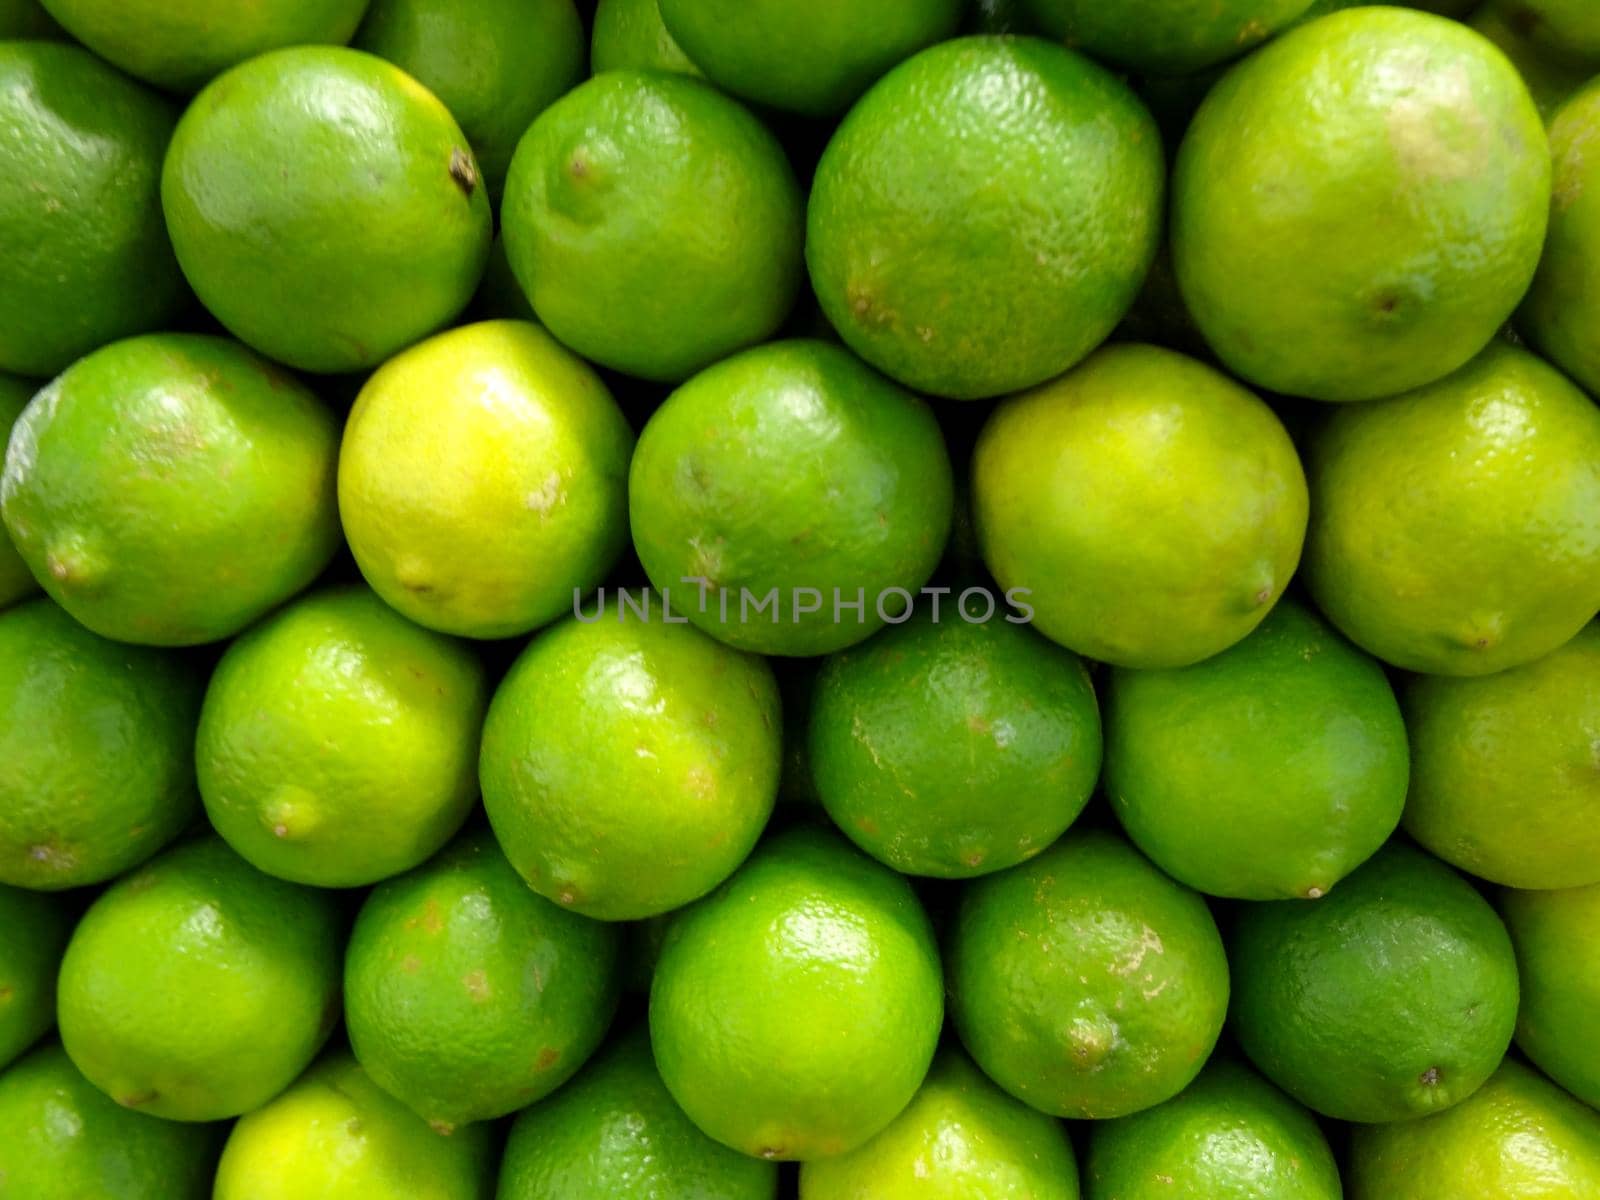 Limes on display by EricGBVD